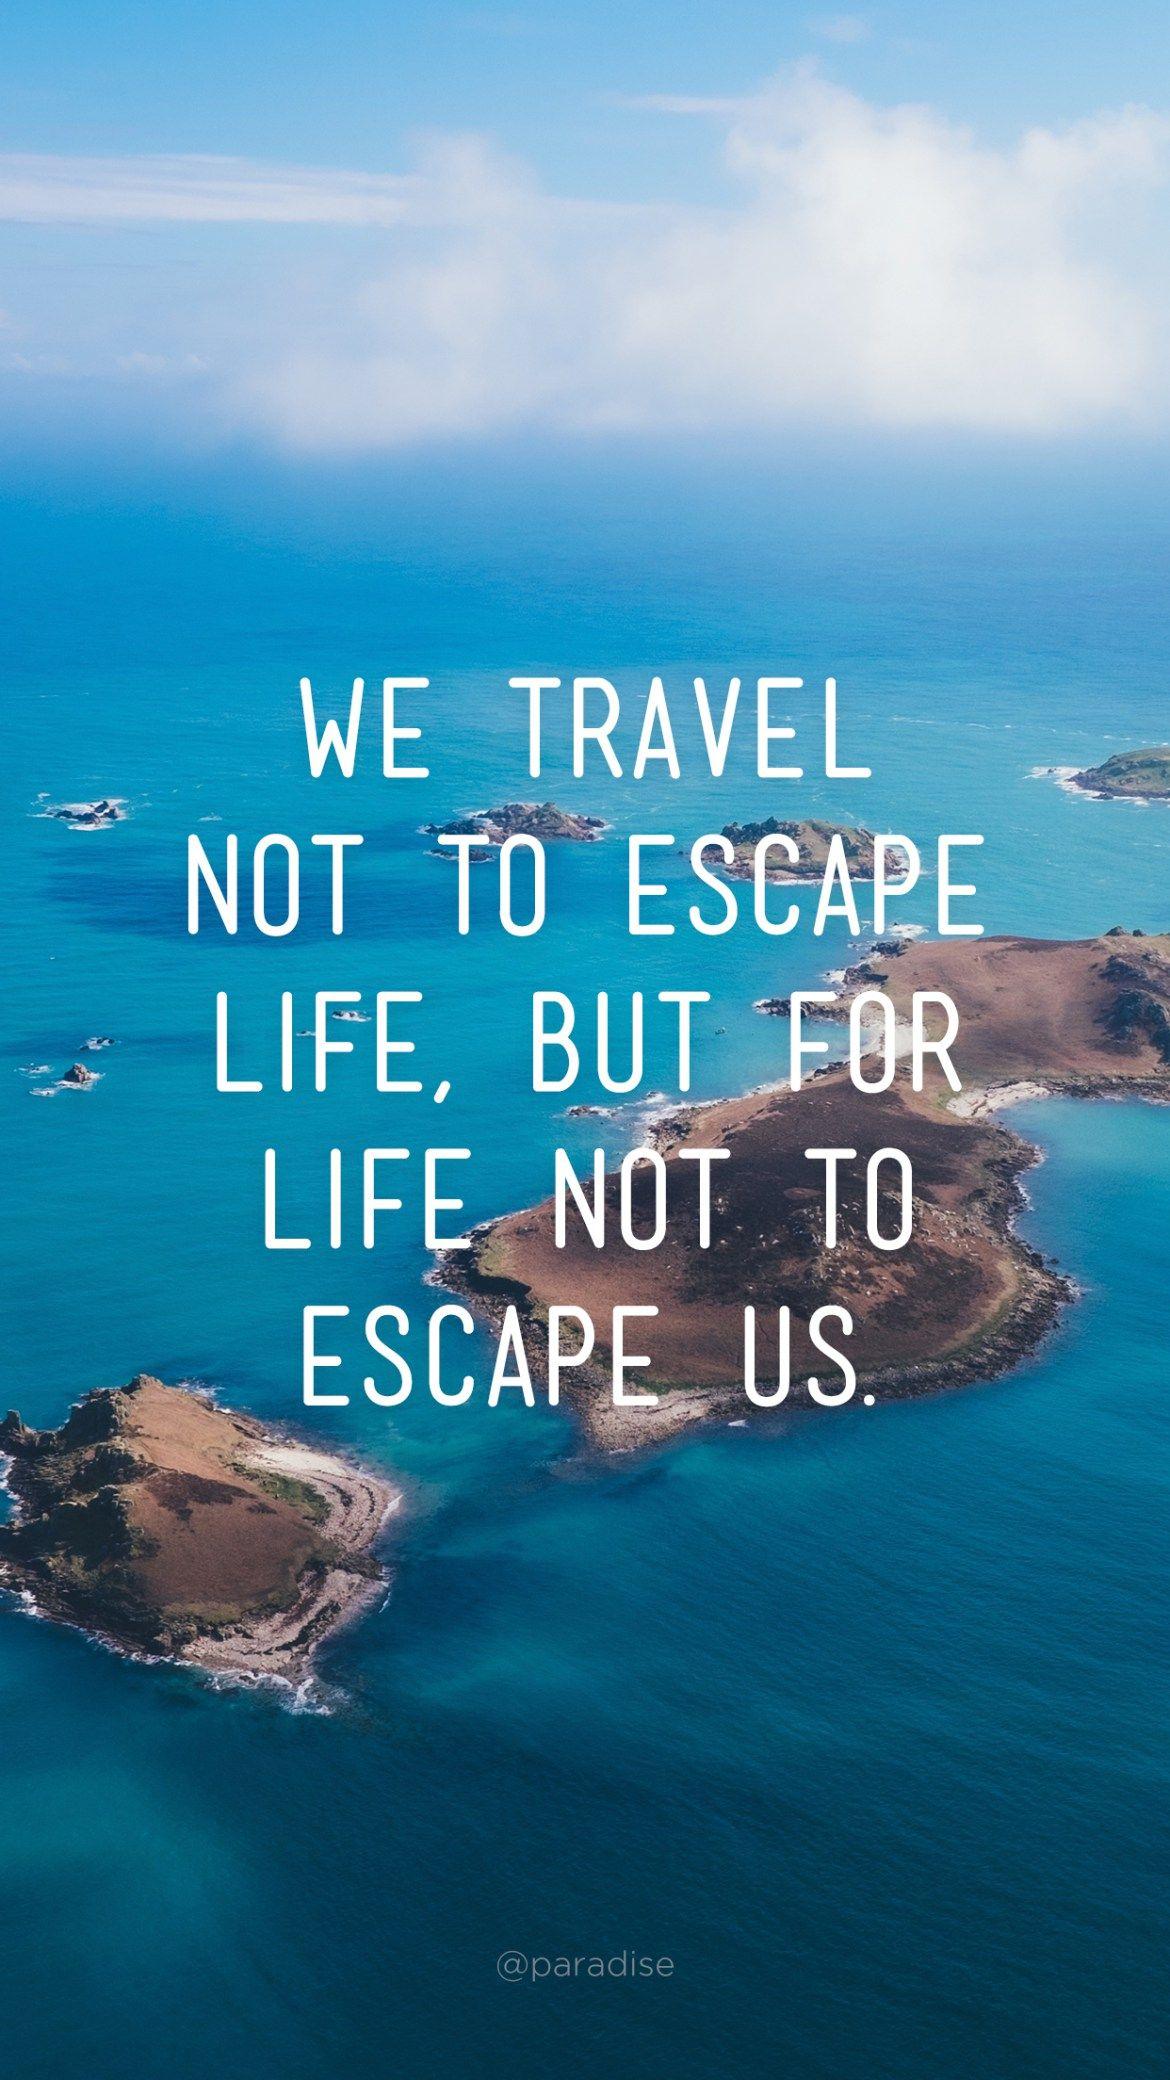 Beautiful iPhone Wallpaper with Travel Quotes. Via Paradise